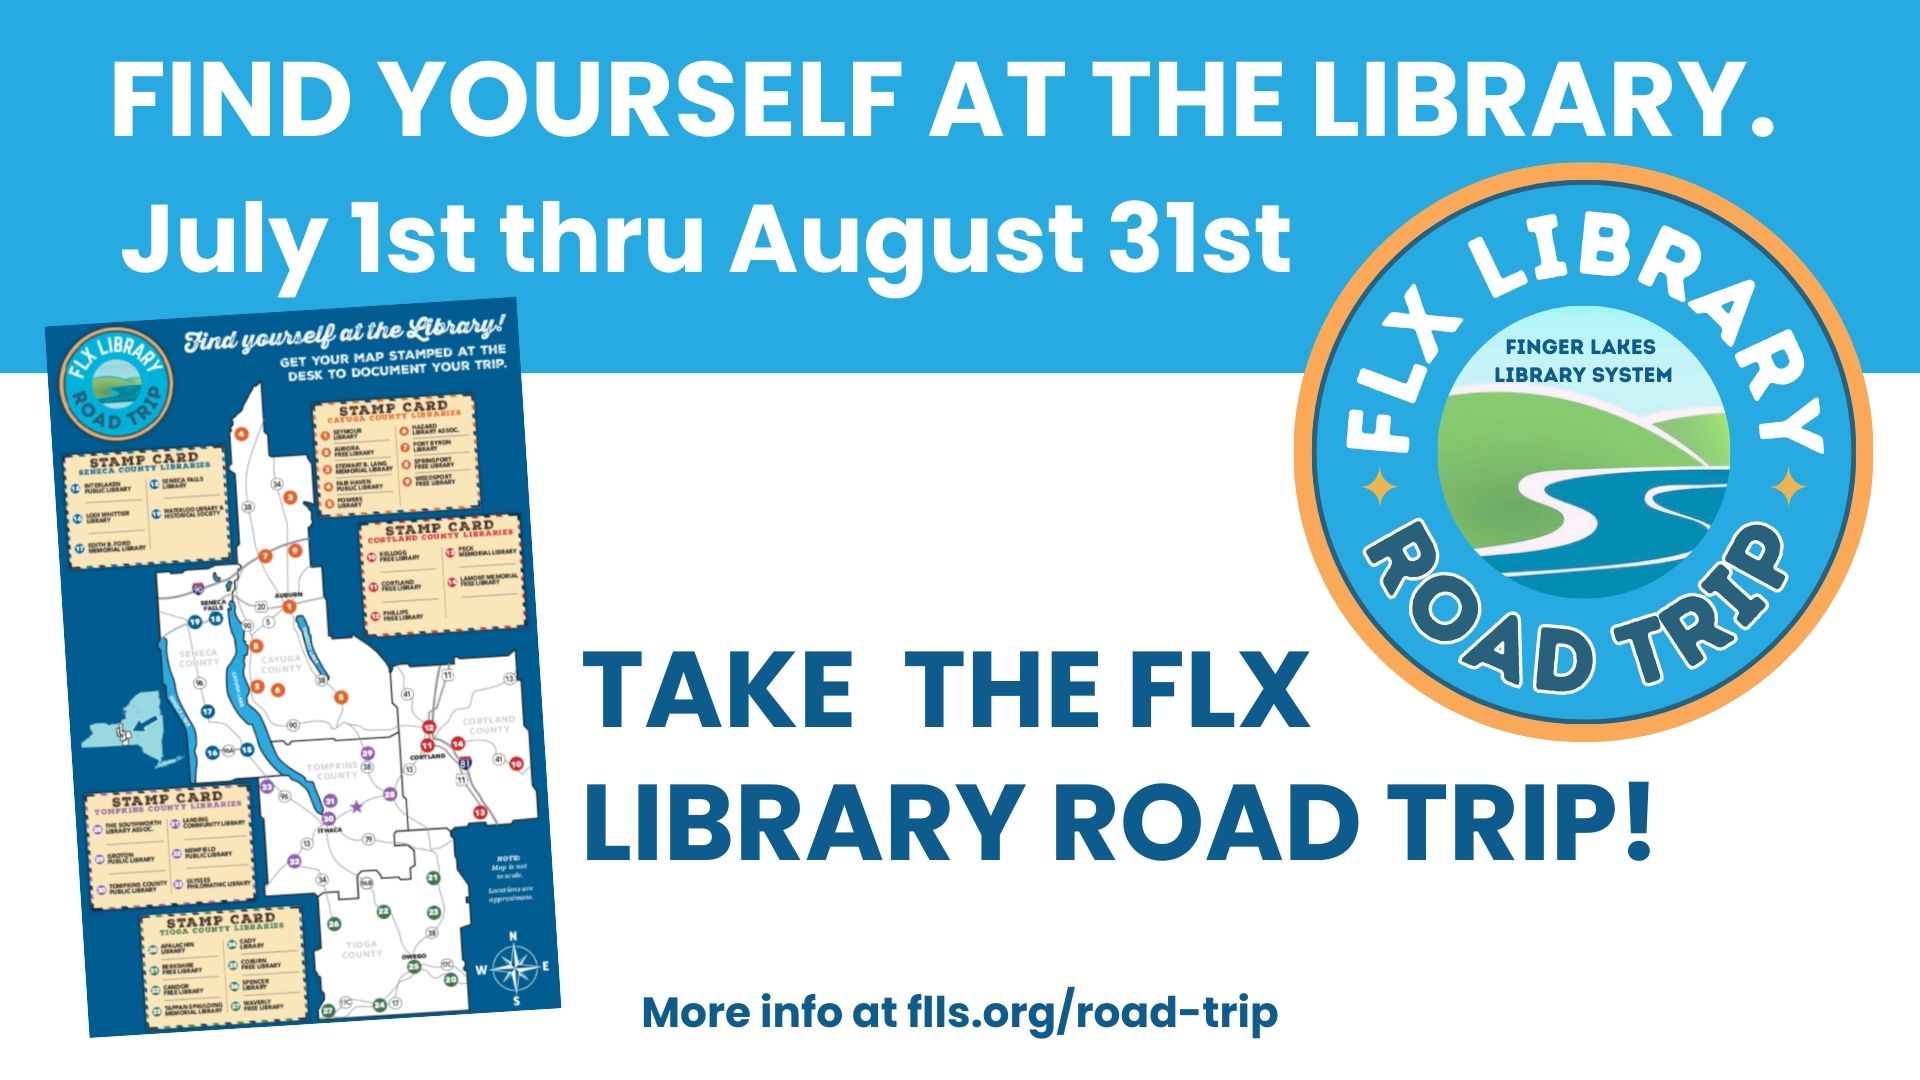 Find yourself at the library. July 1st thru August 31st. Take the FLX Library Road Trip! Graphic with FLX Library Road Trip loge and image of FLX Road Trip Map.